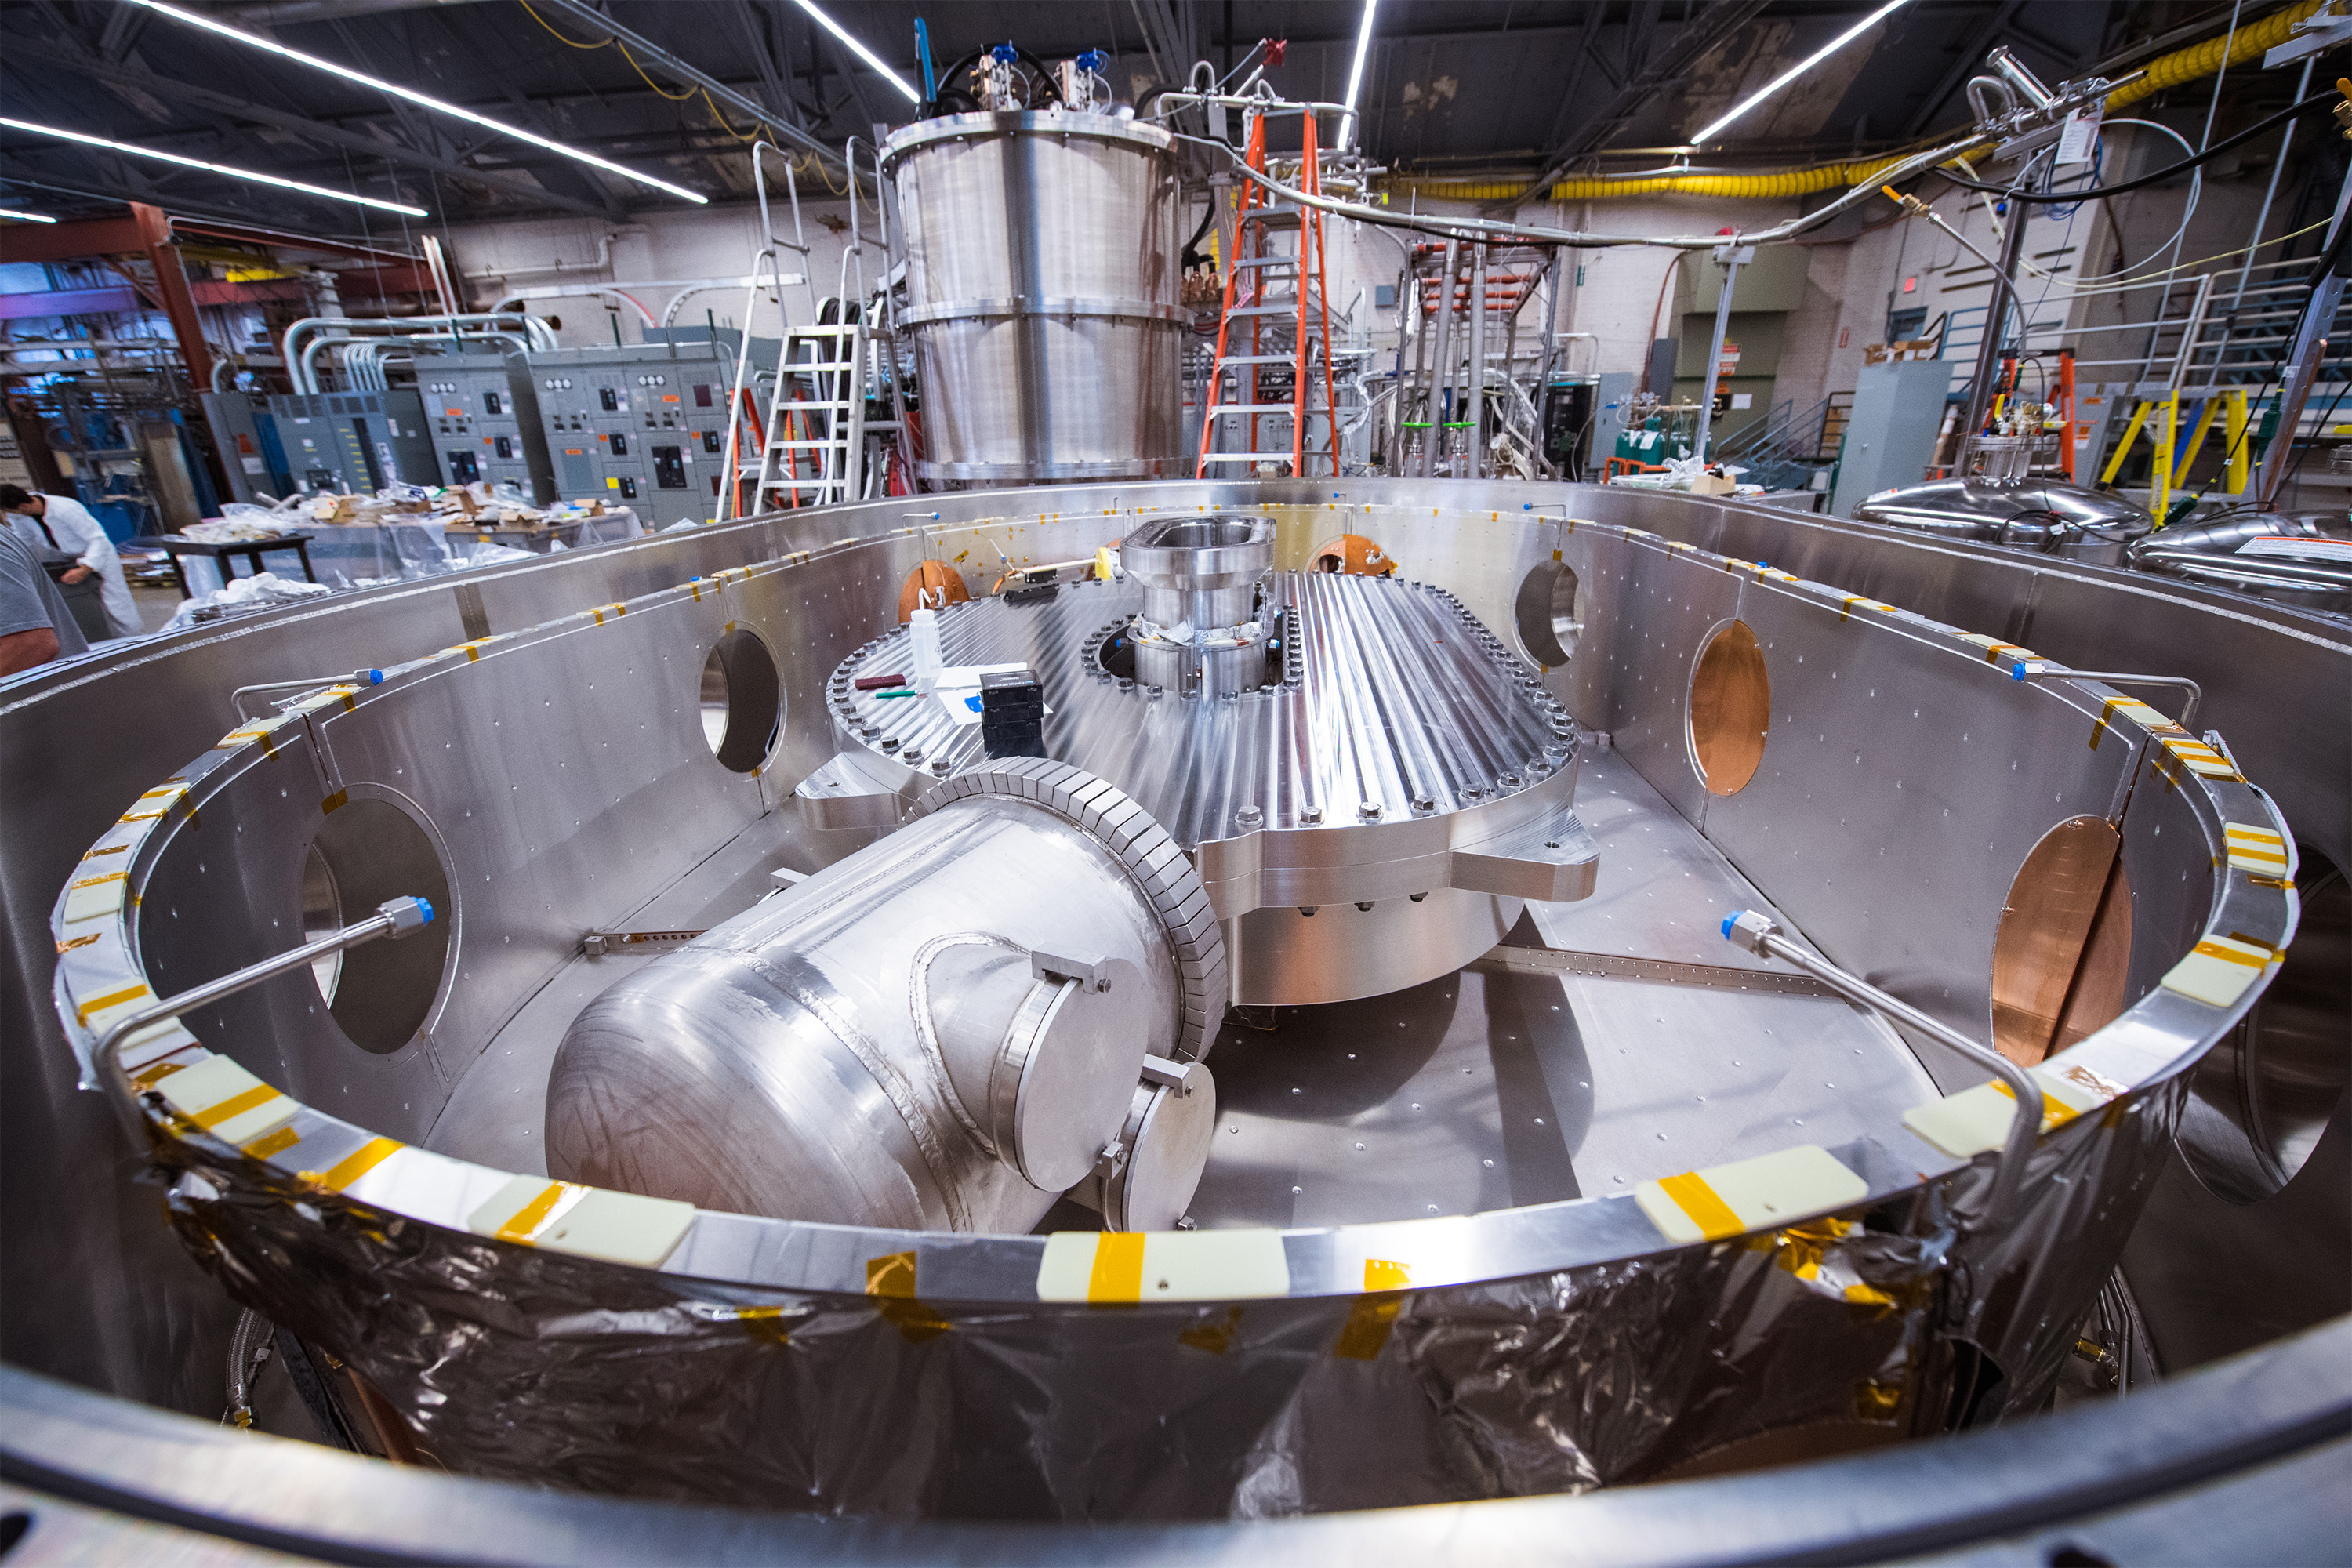 Tests show high-temperature superconducting magnets are ready for fusion, MIT News